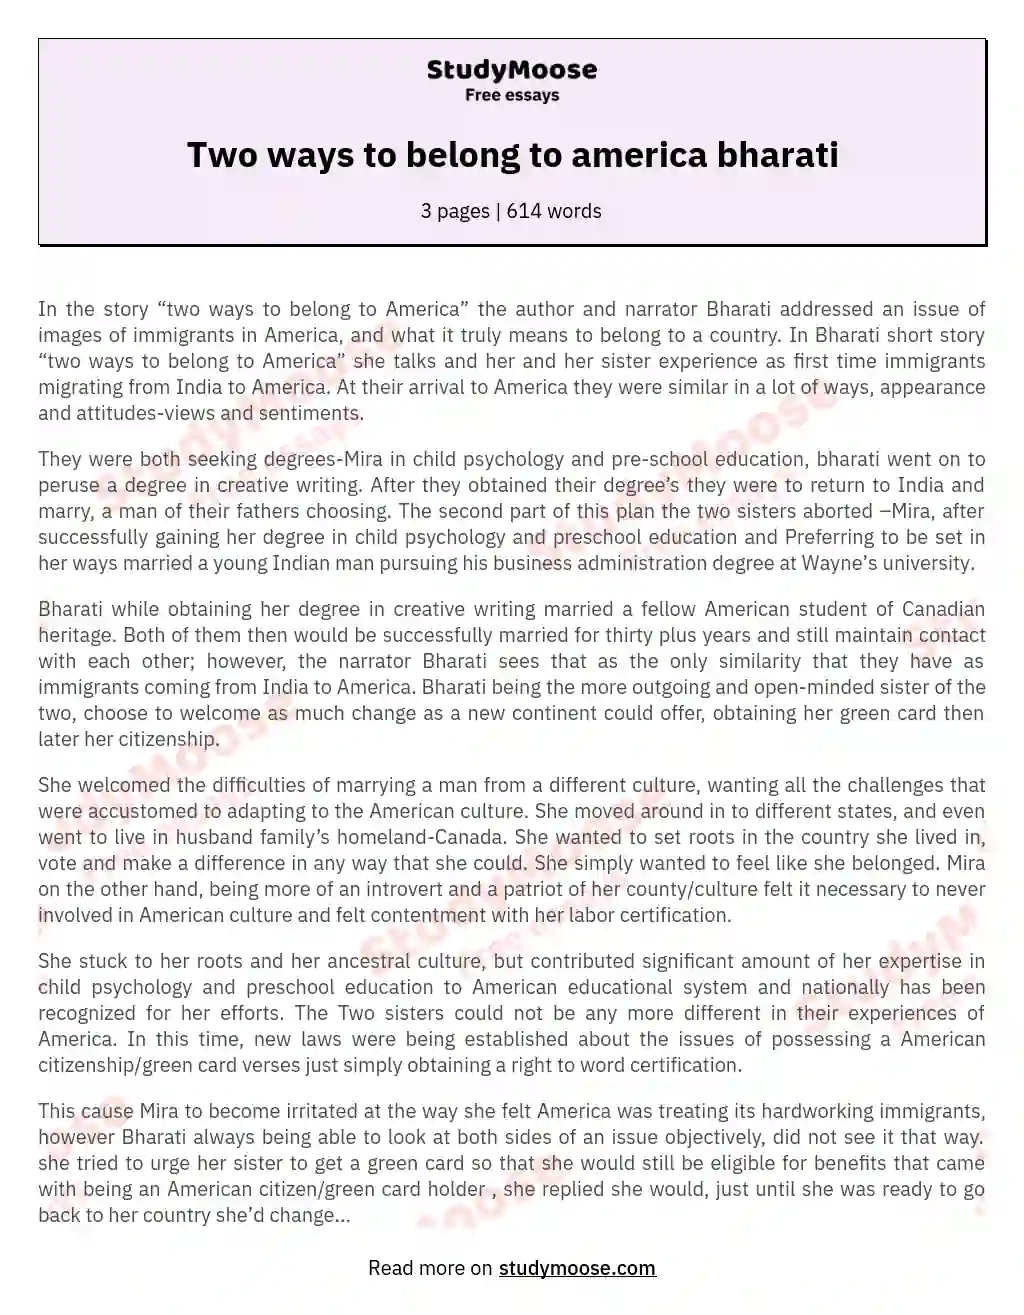 Two ways to belong to america bharati essay